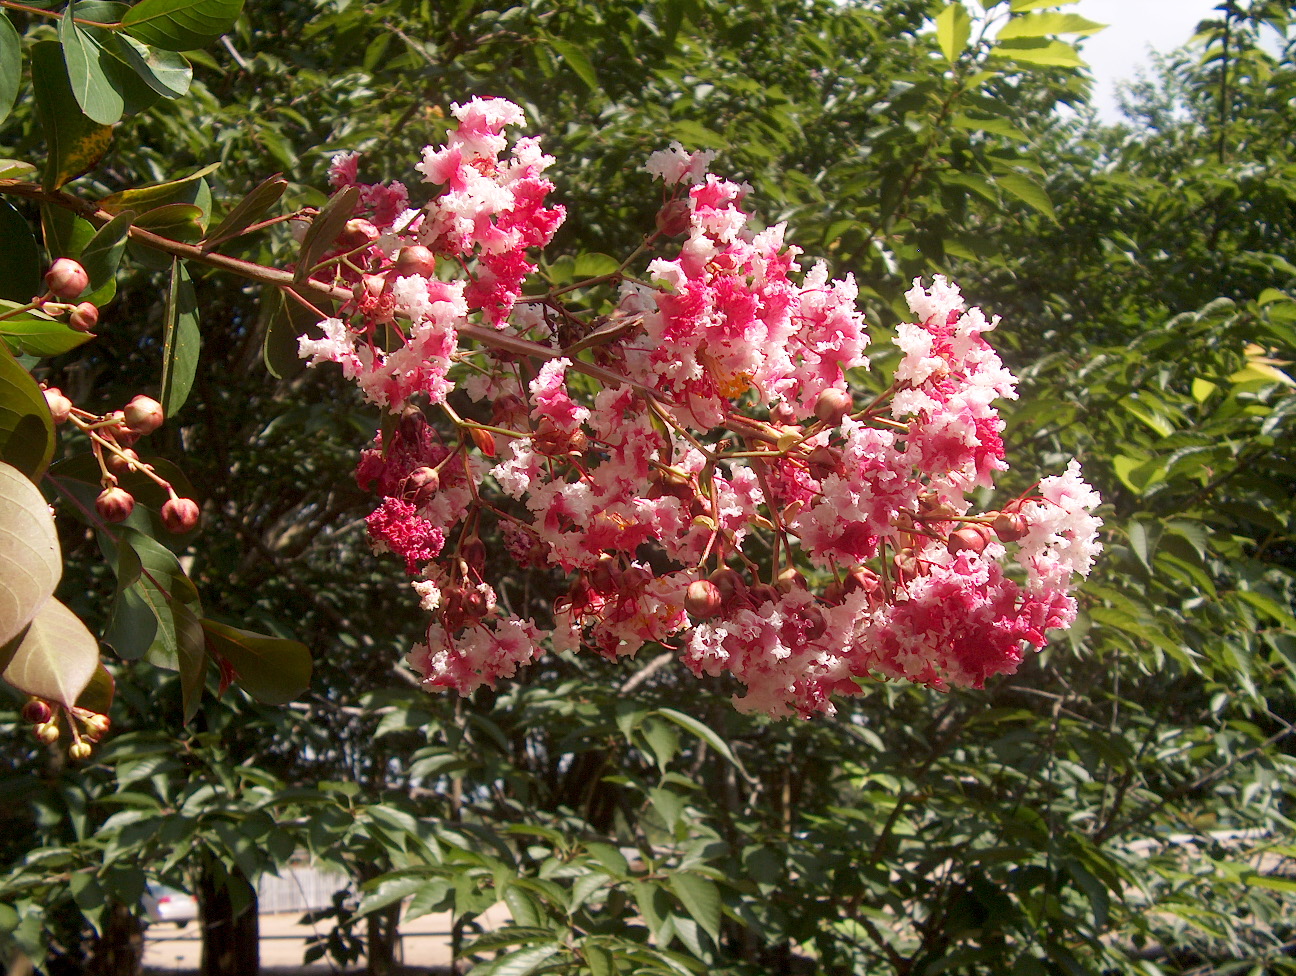 Lagerstroemia indica 'Prairie Lace' / Lagerstroemia indica 'Prairie Lace'